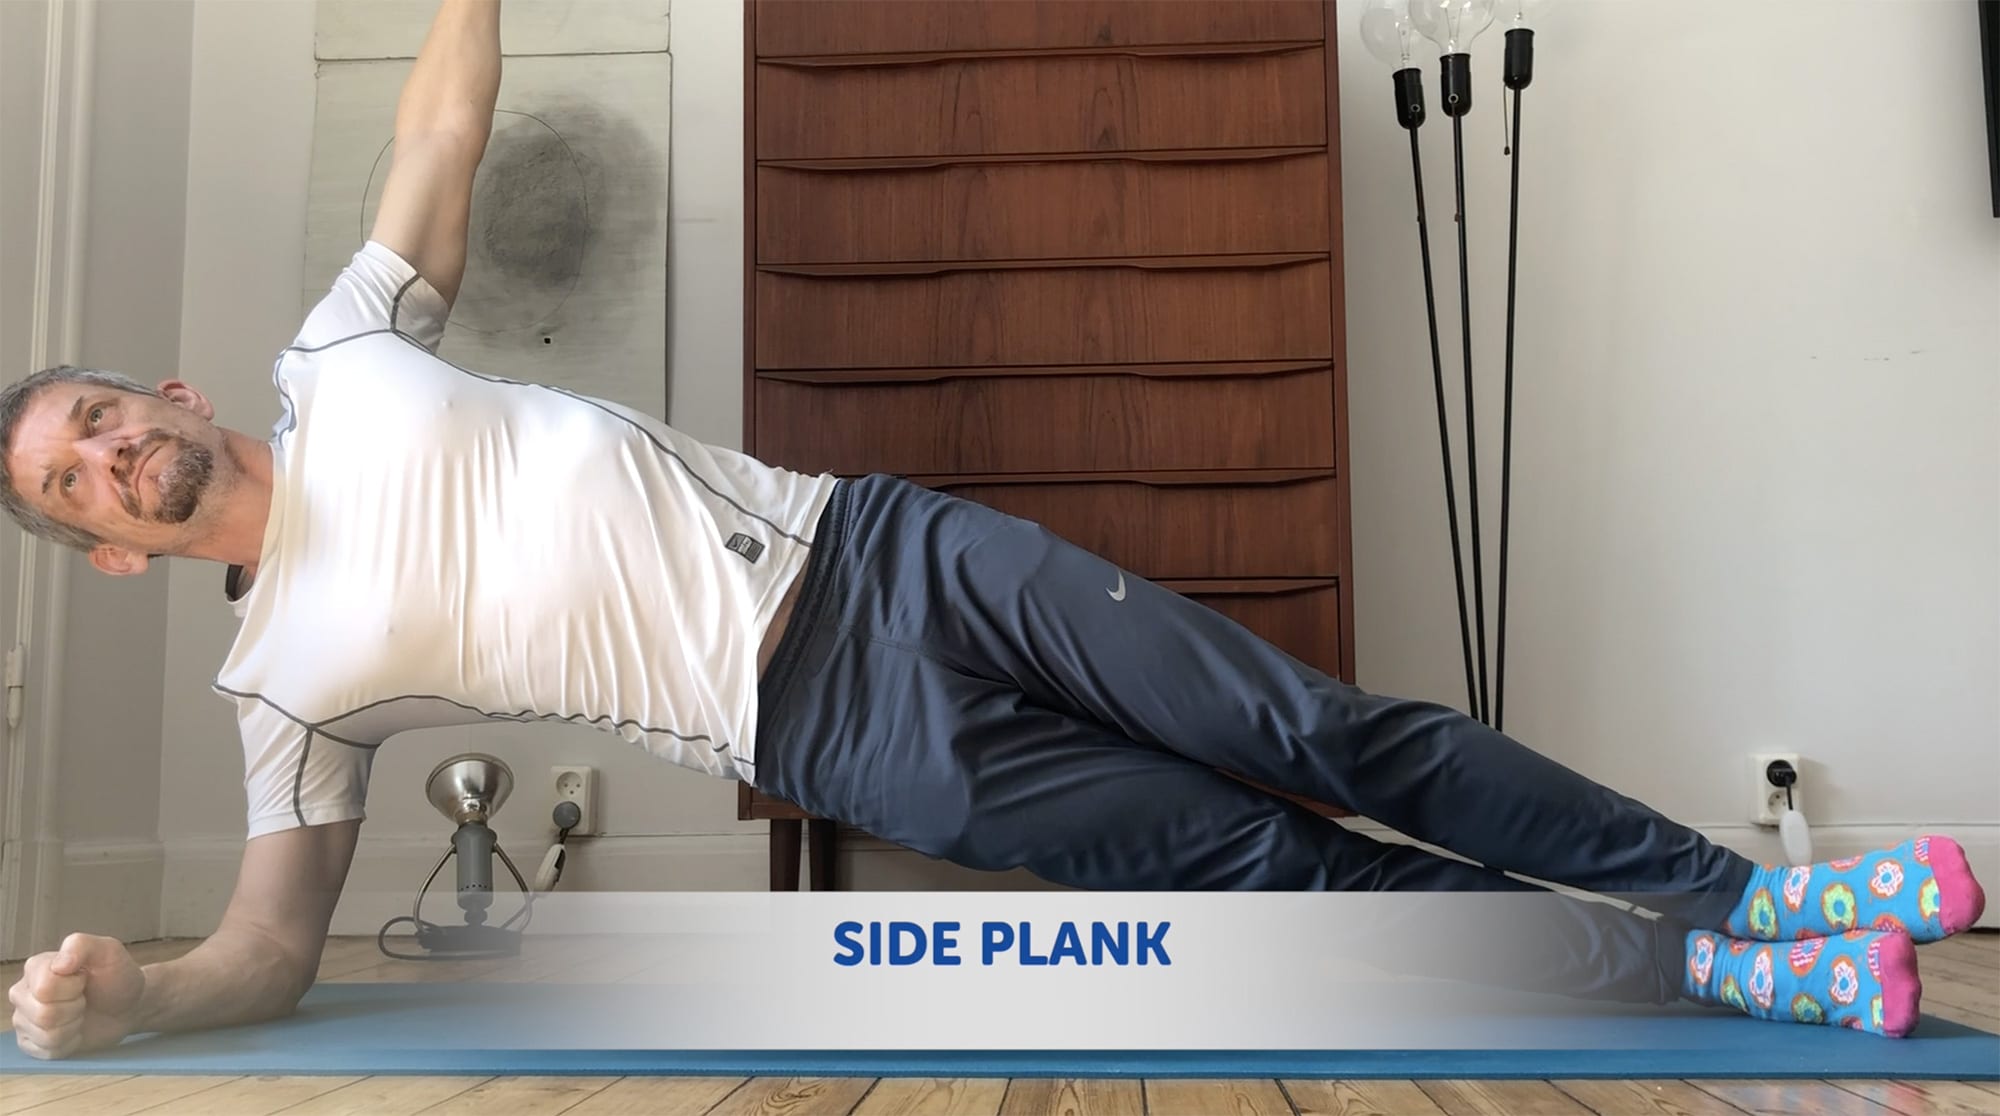 The Side Plank comes at it from a different angle